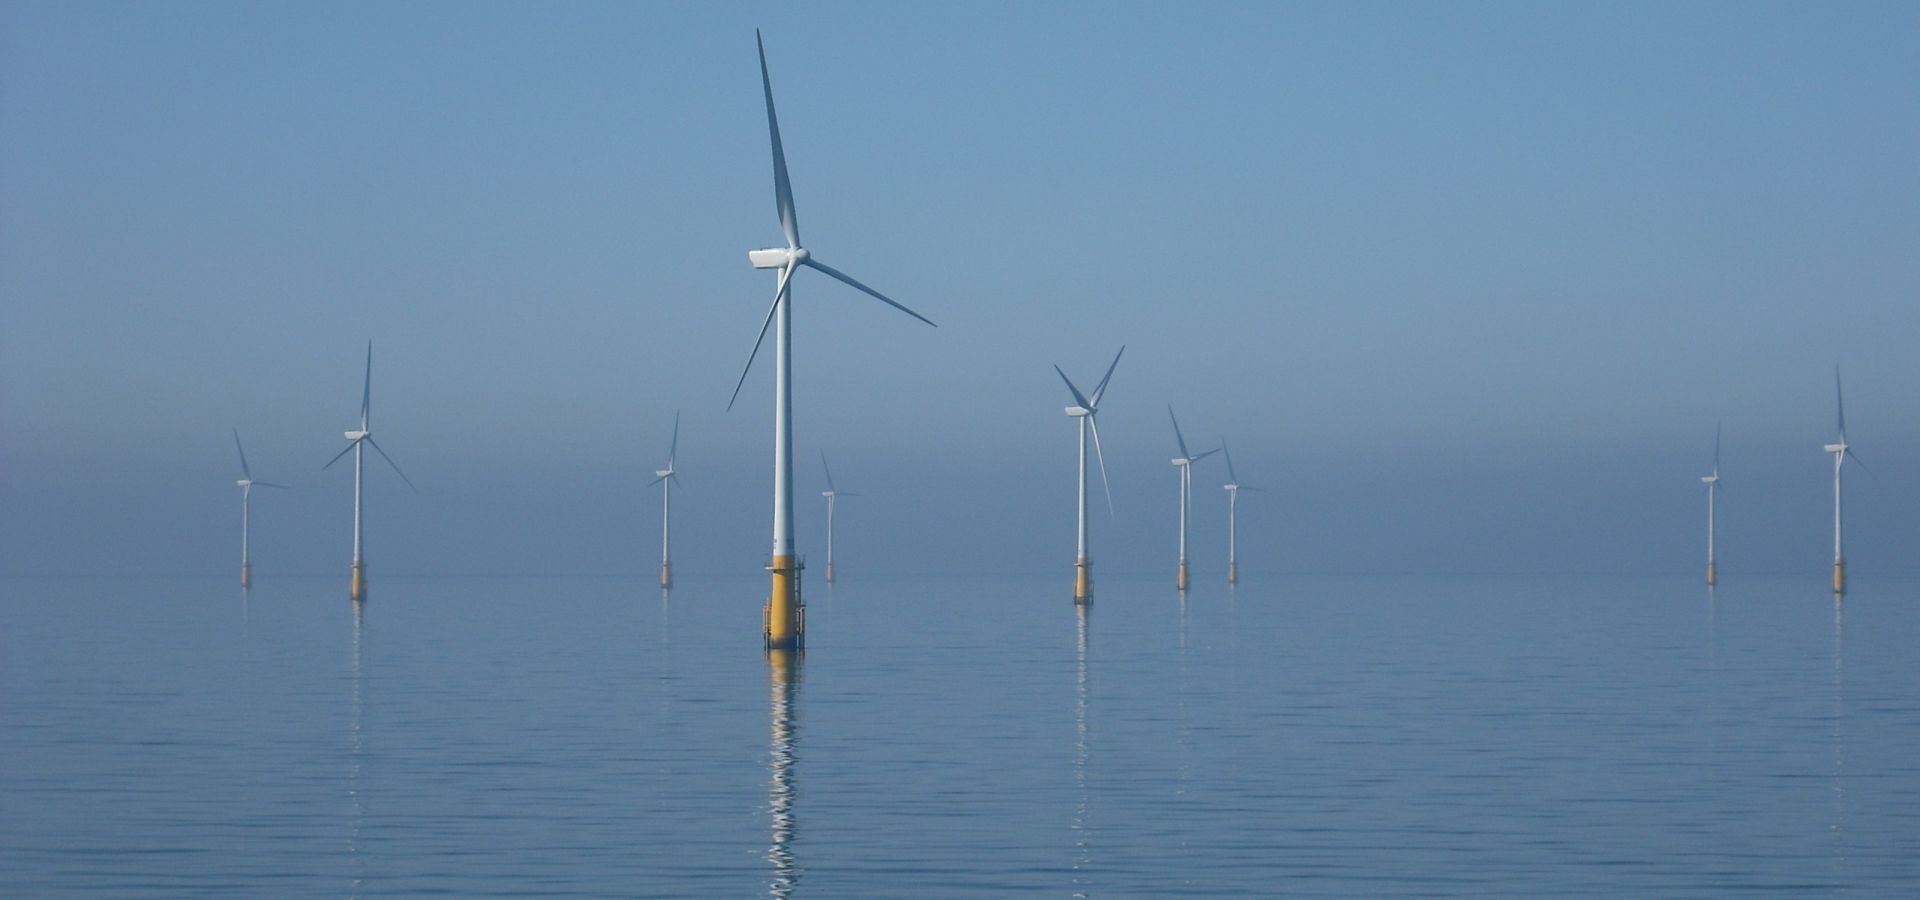 Poland followed the coal path in the las years now it wants to push offshore wind farm development